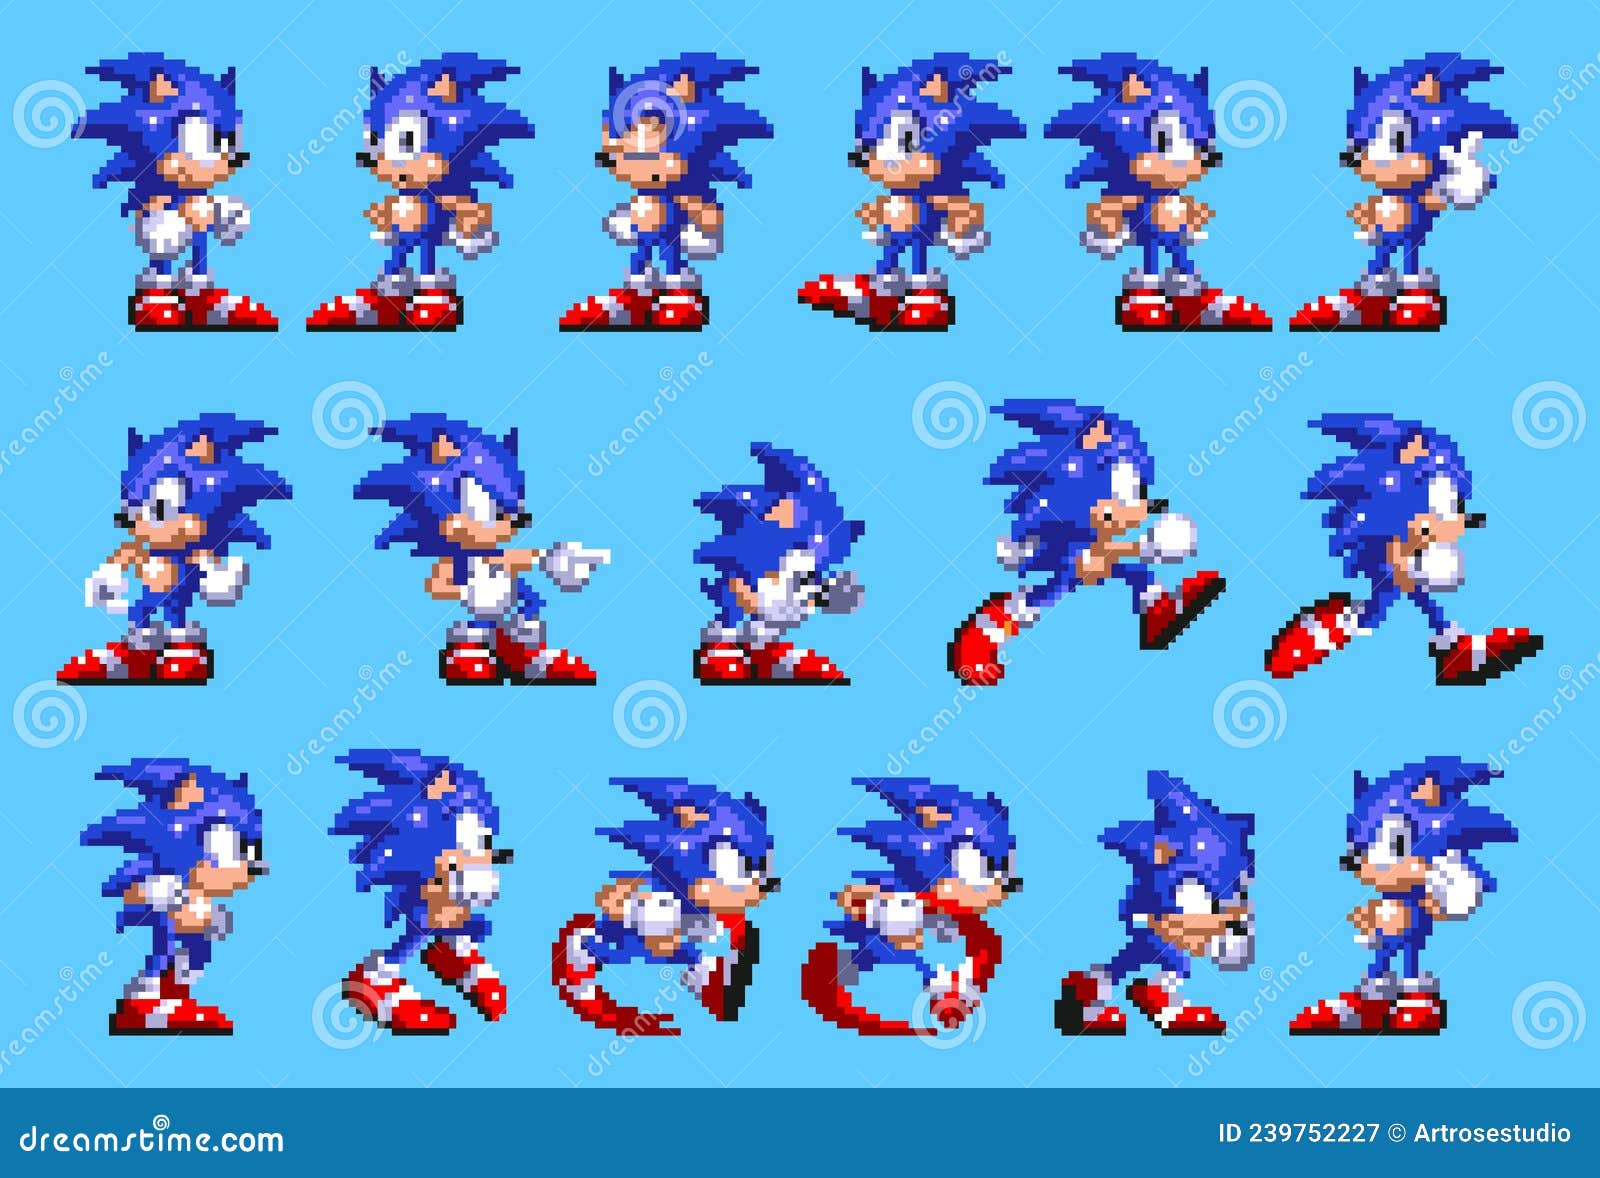 Classic Sonic, standing Supersonic illustration transparent background PNG  clipart